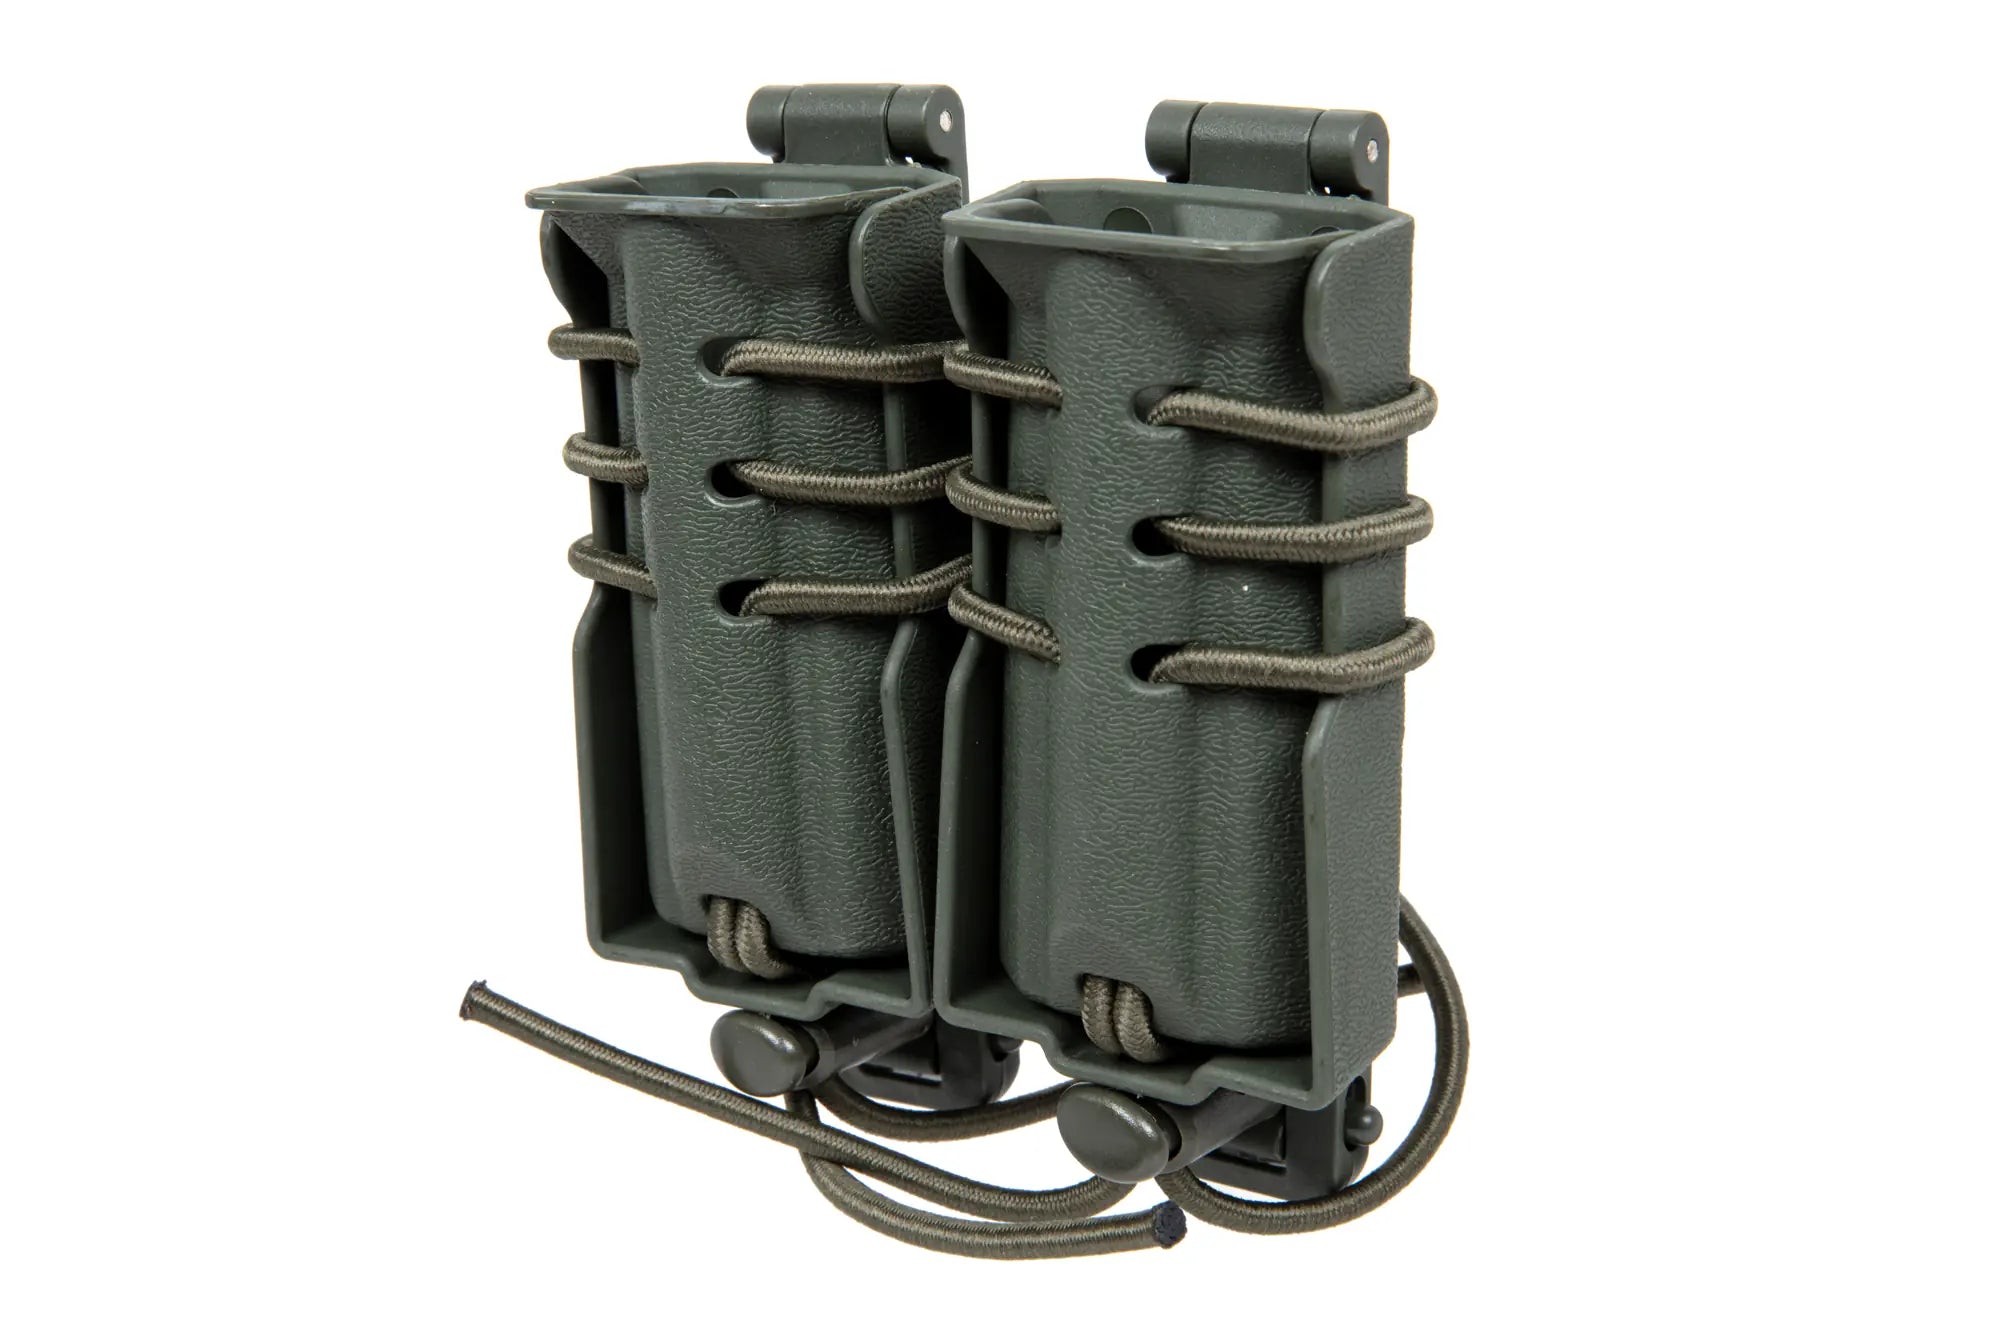 Carrier for 2 9mm magazines Wosport Urban Assault Quick Pull Olive